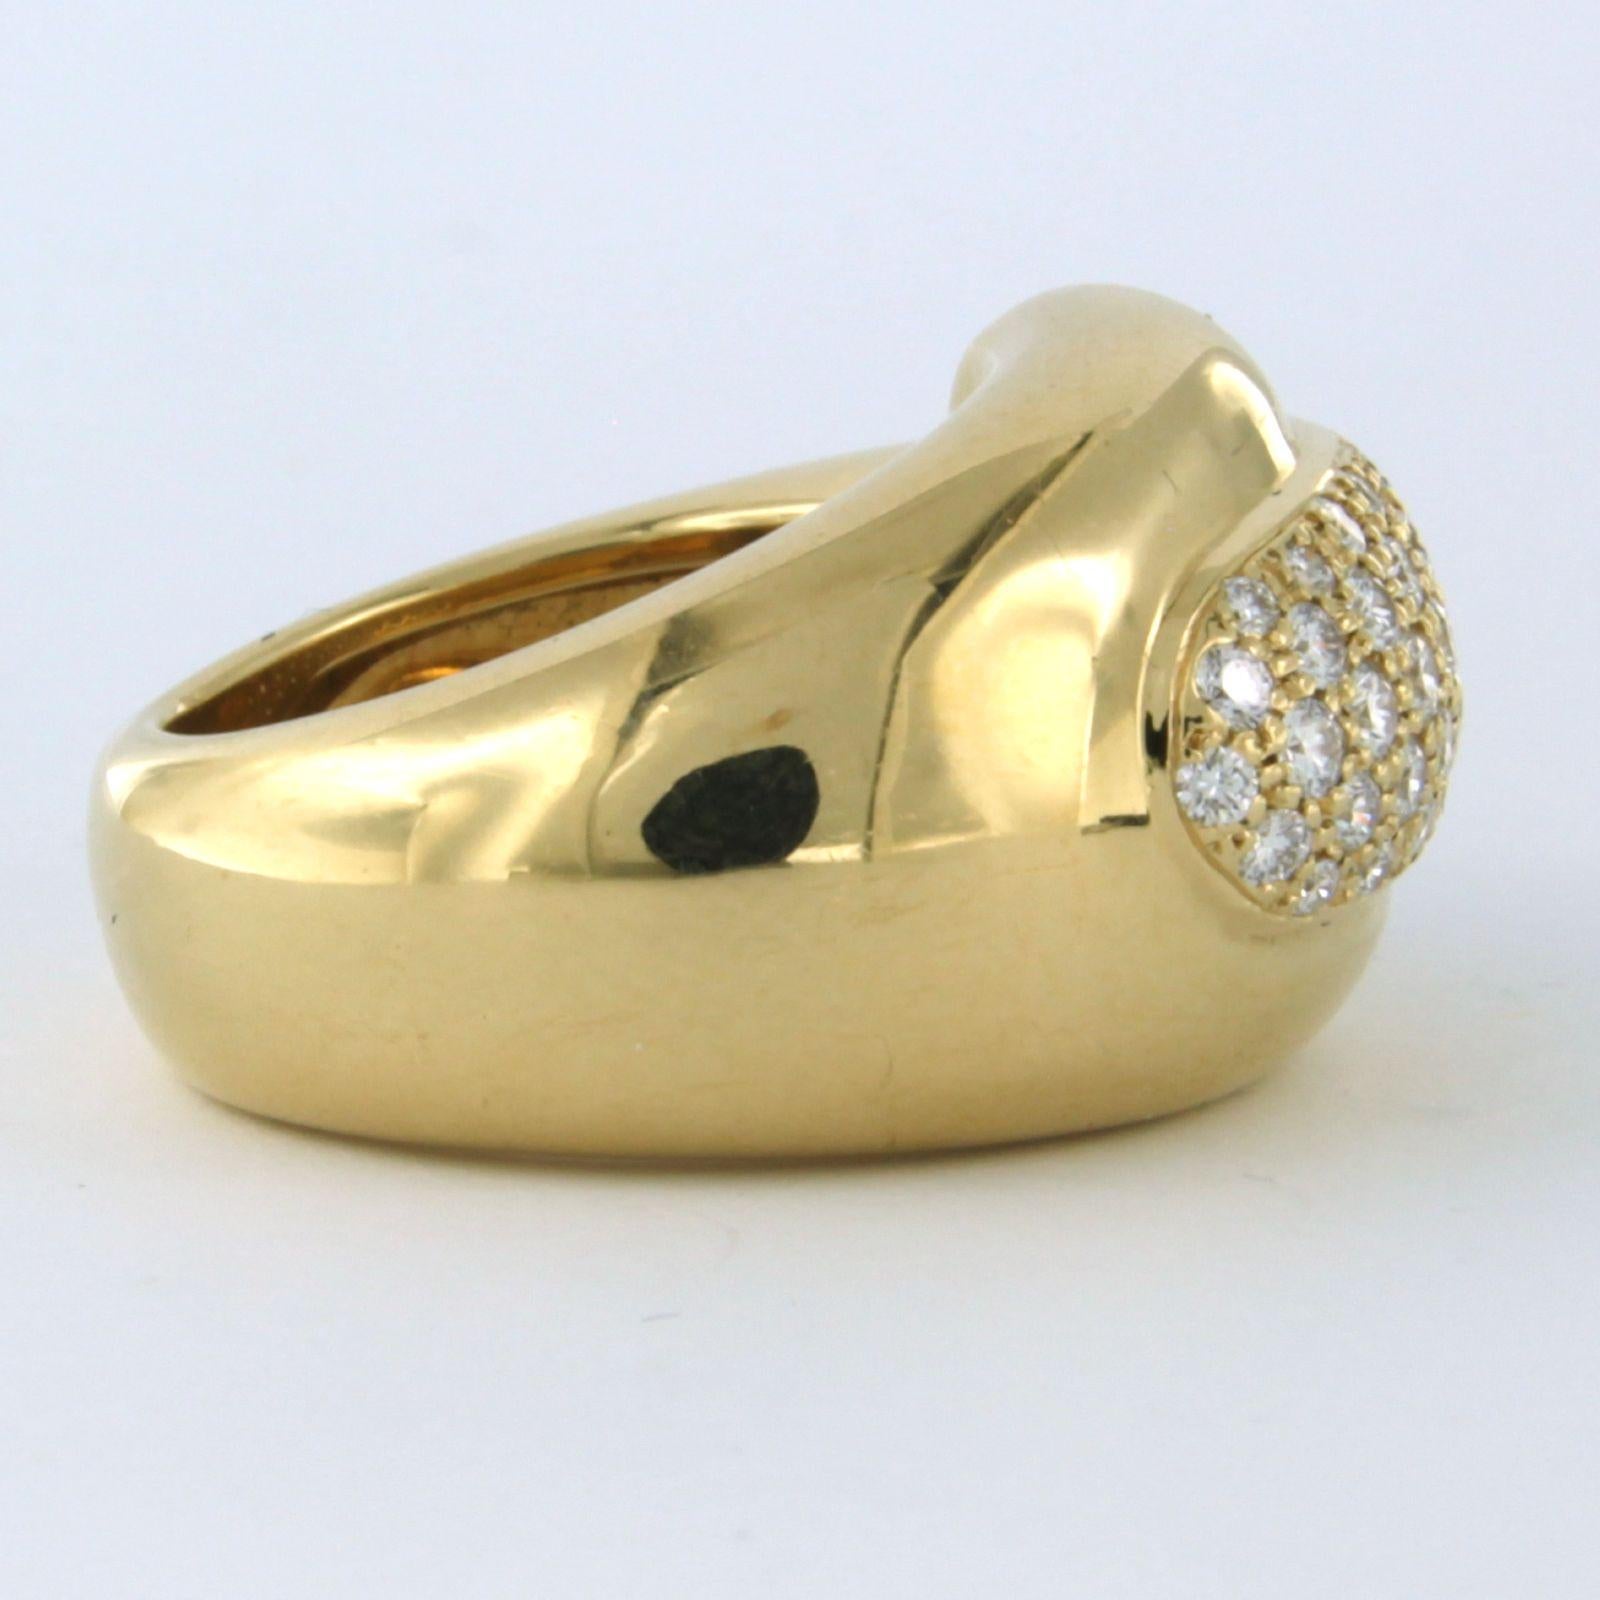 CHAUMET PARIS ring with diamonds 18k yellow gold For Sale 1